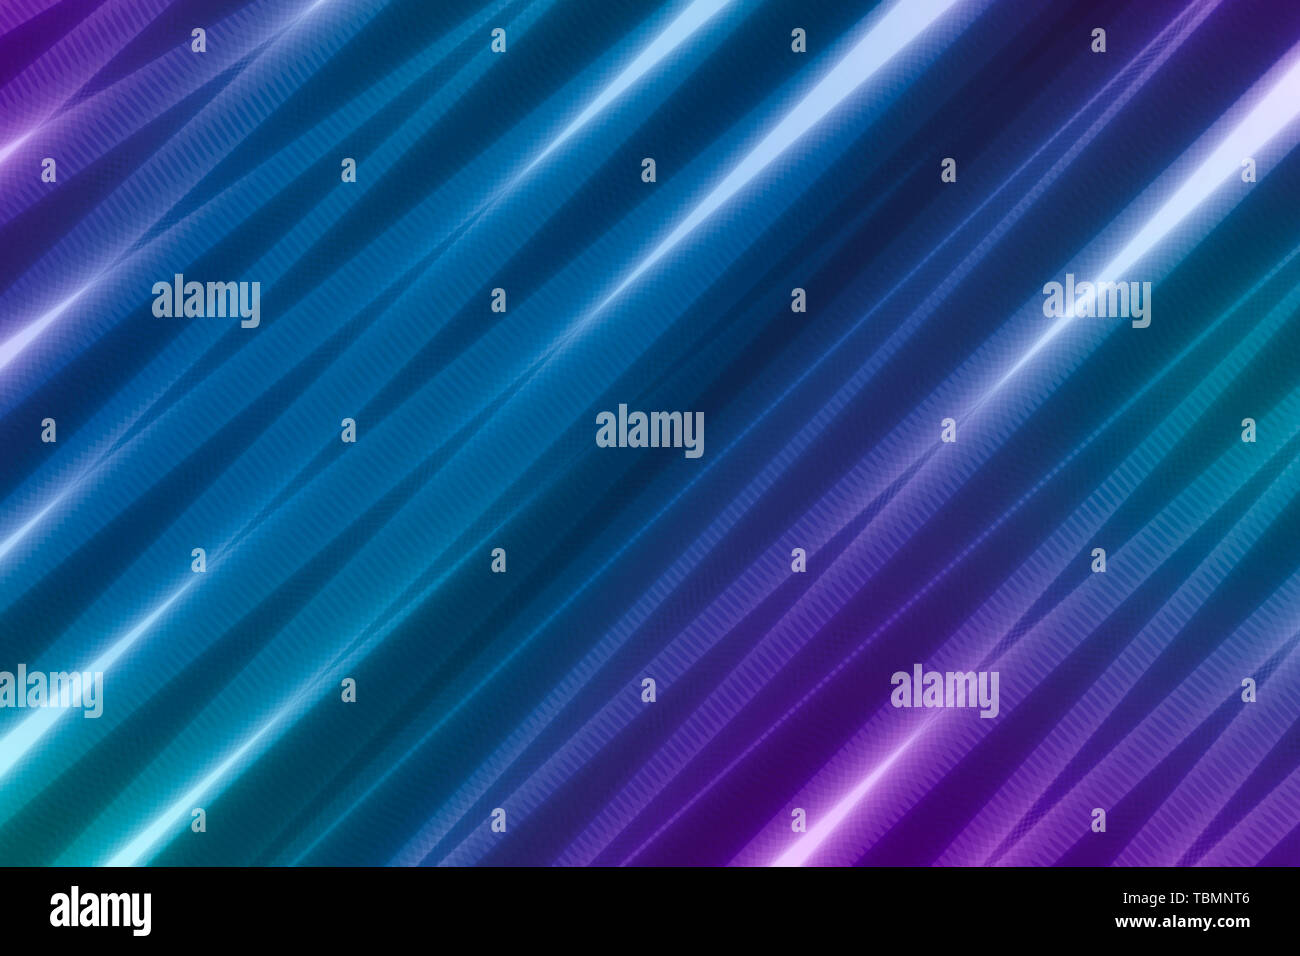 illustration of blue and purple abstract background with blurred magic neon light  lines. Stock Photo